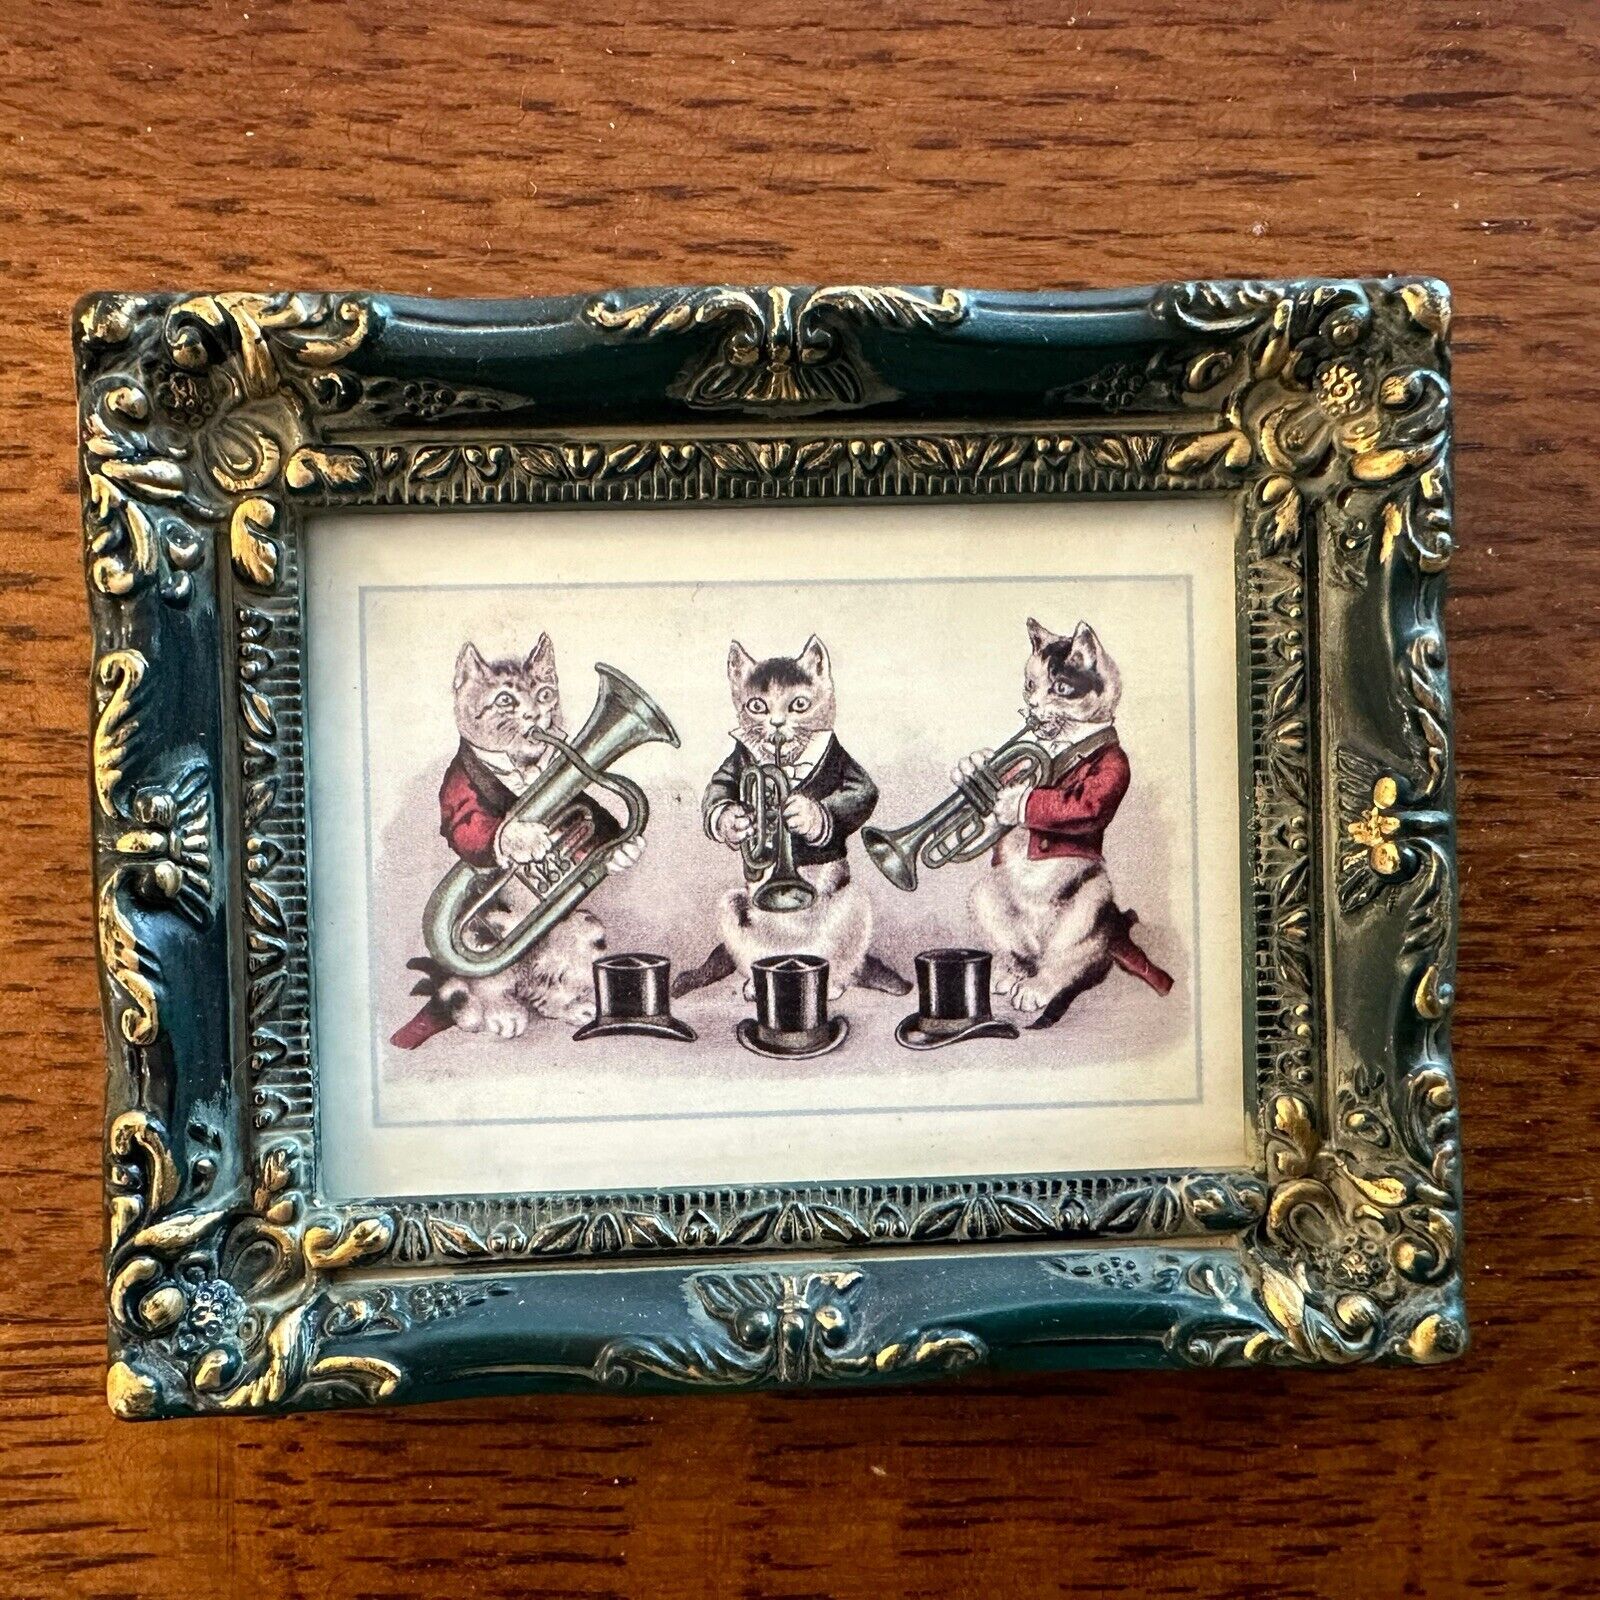 Cat Lovers Small FRAME With Vintage Cat Card 4”x3” éditions adorata Musical Top